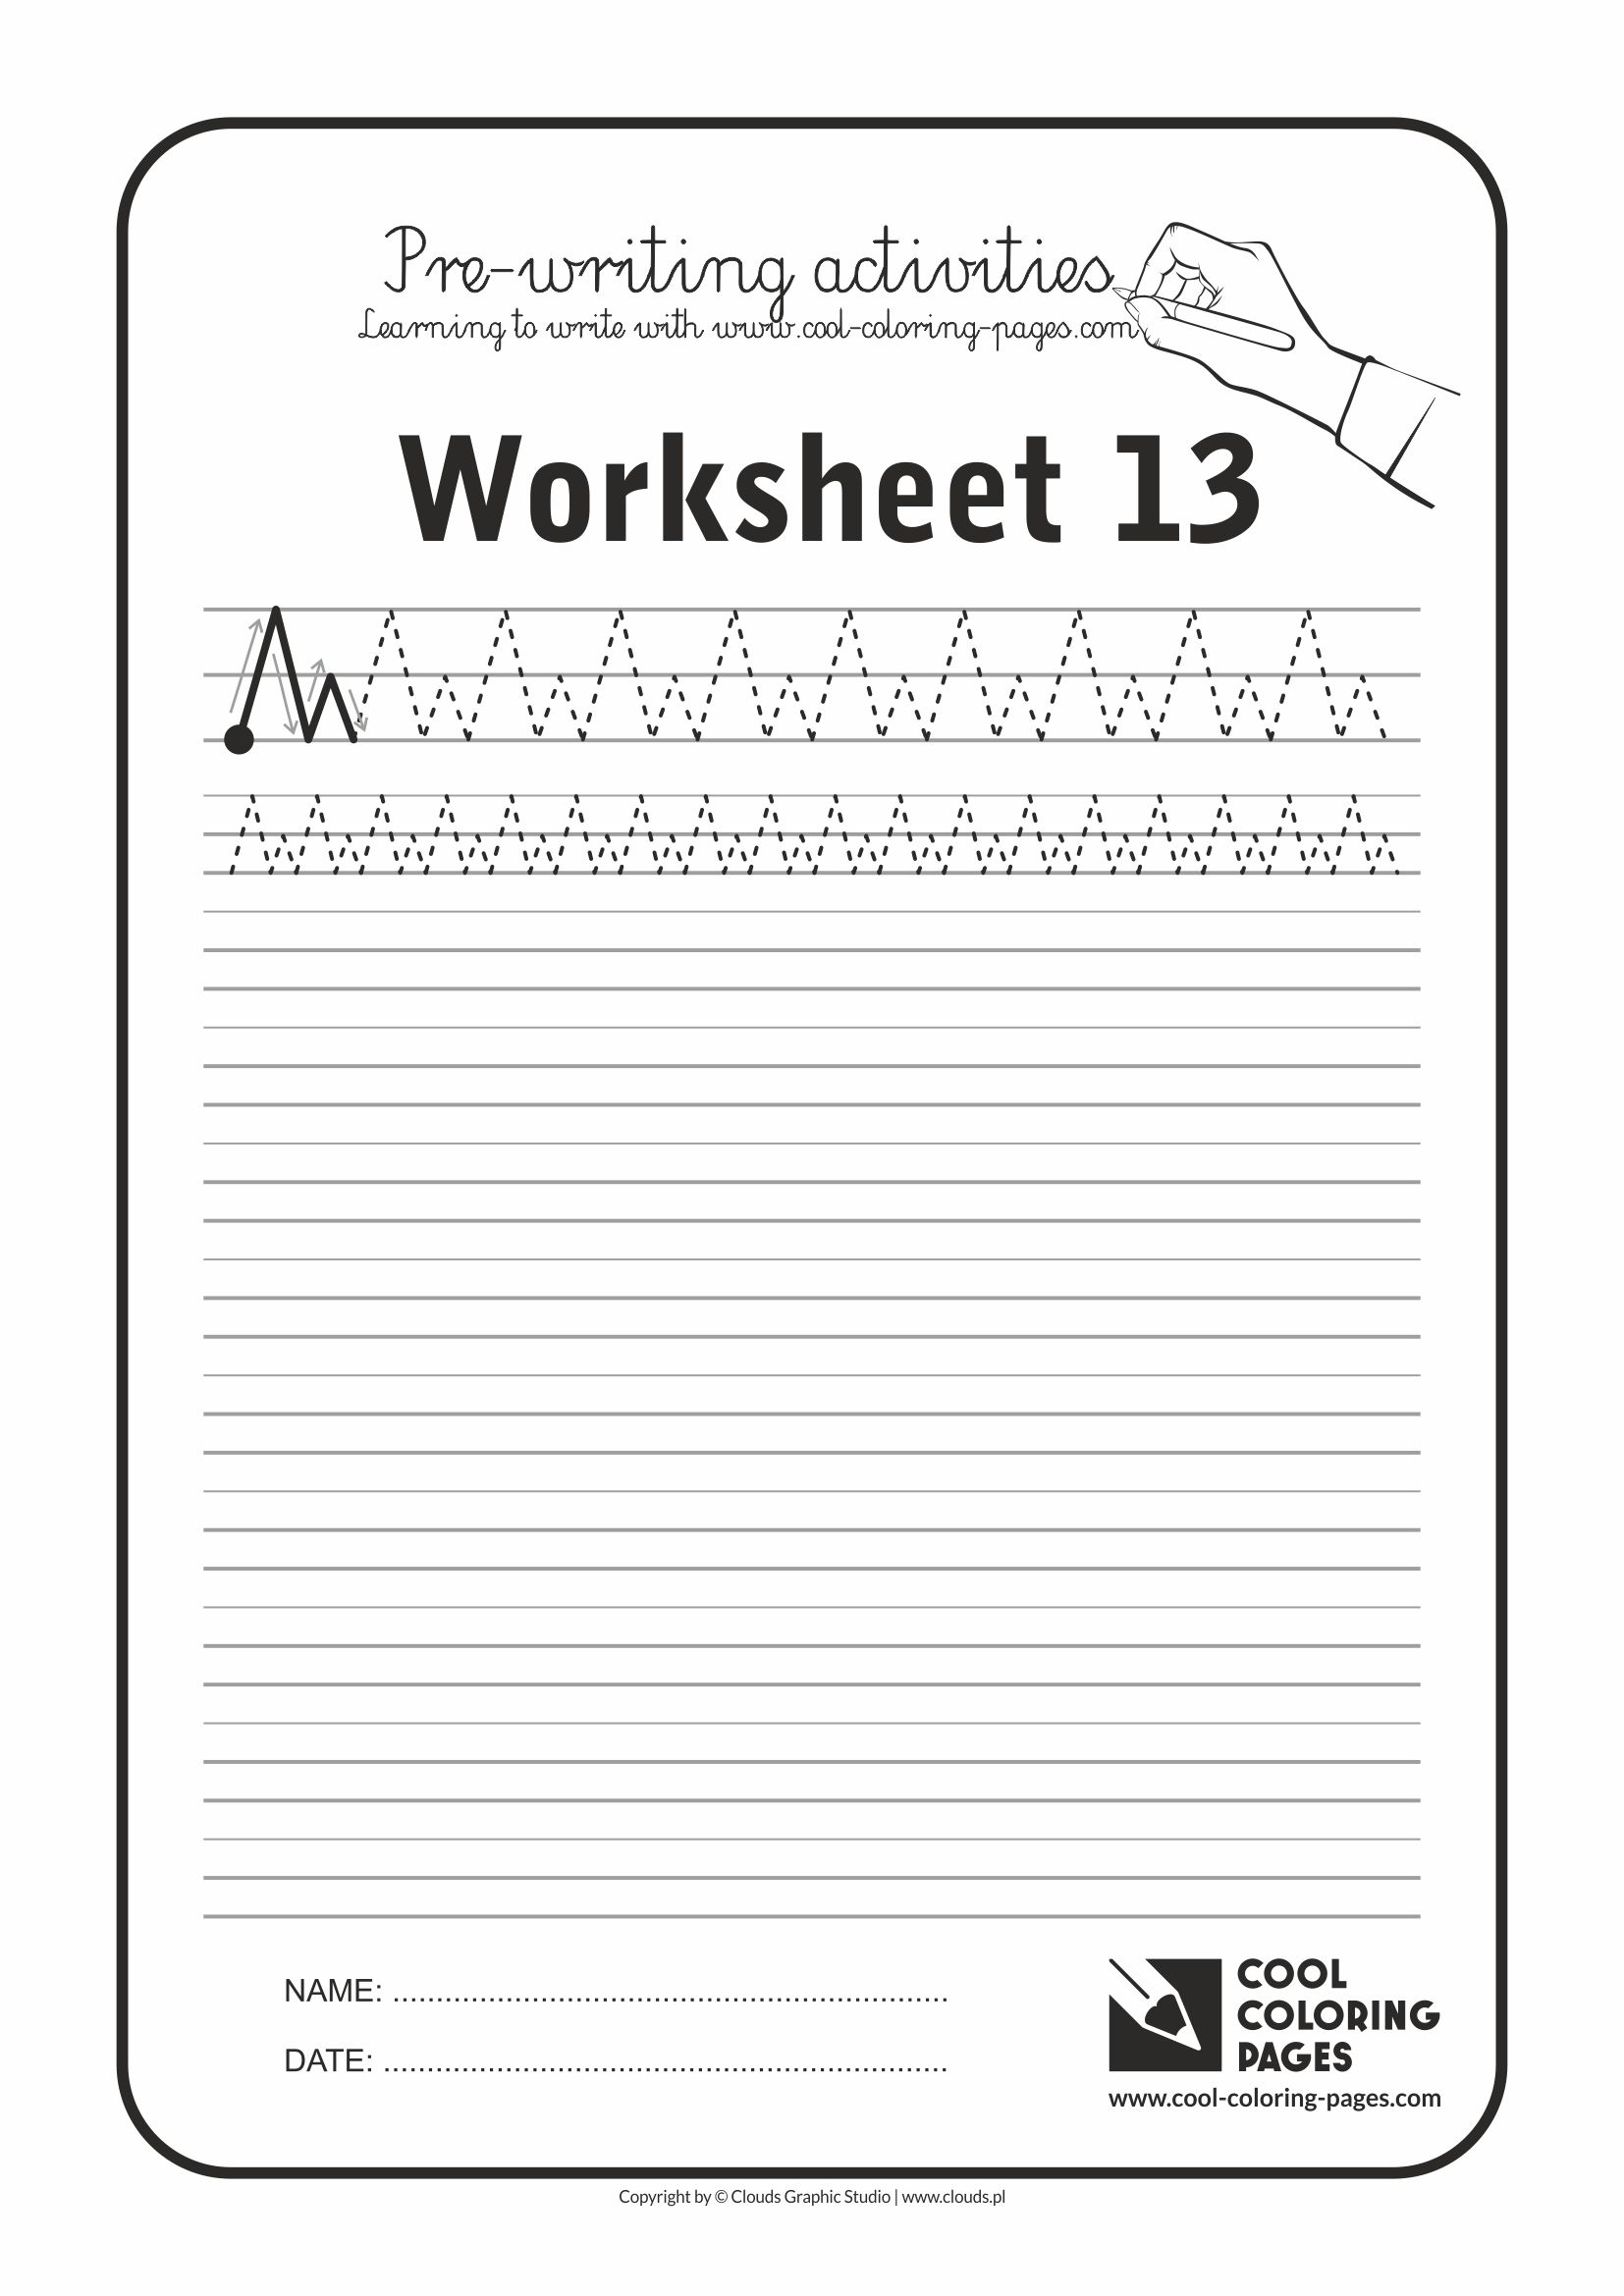 Cool Coloring Pages / Pre-writing activities / Worksheet no.13